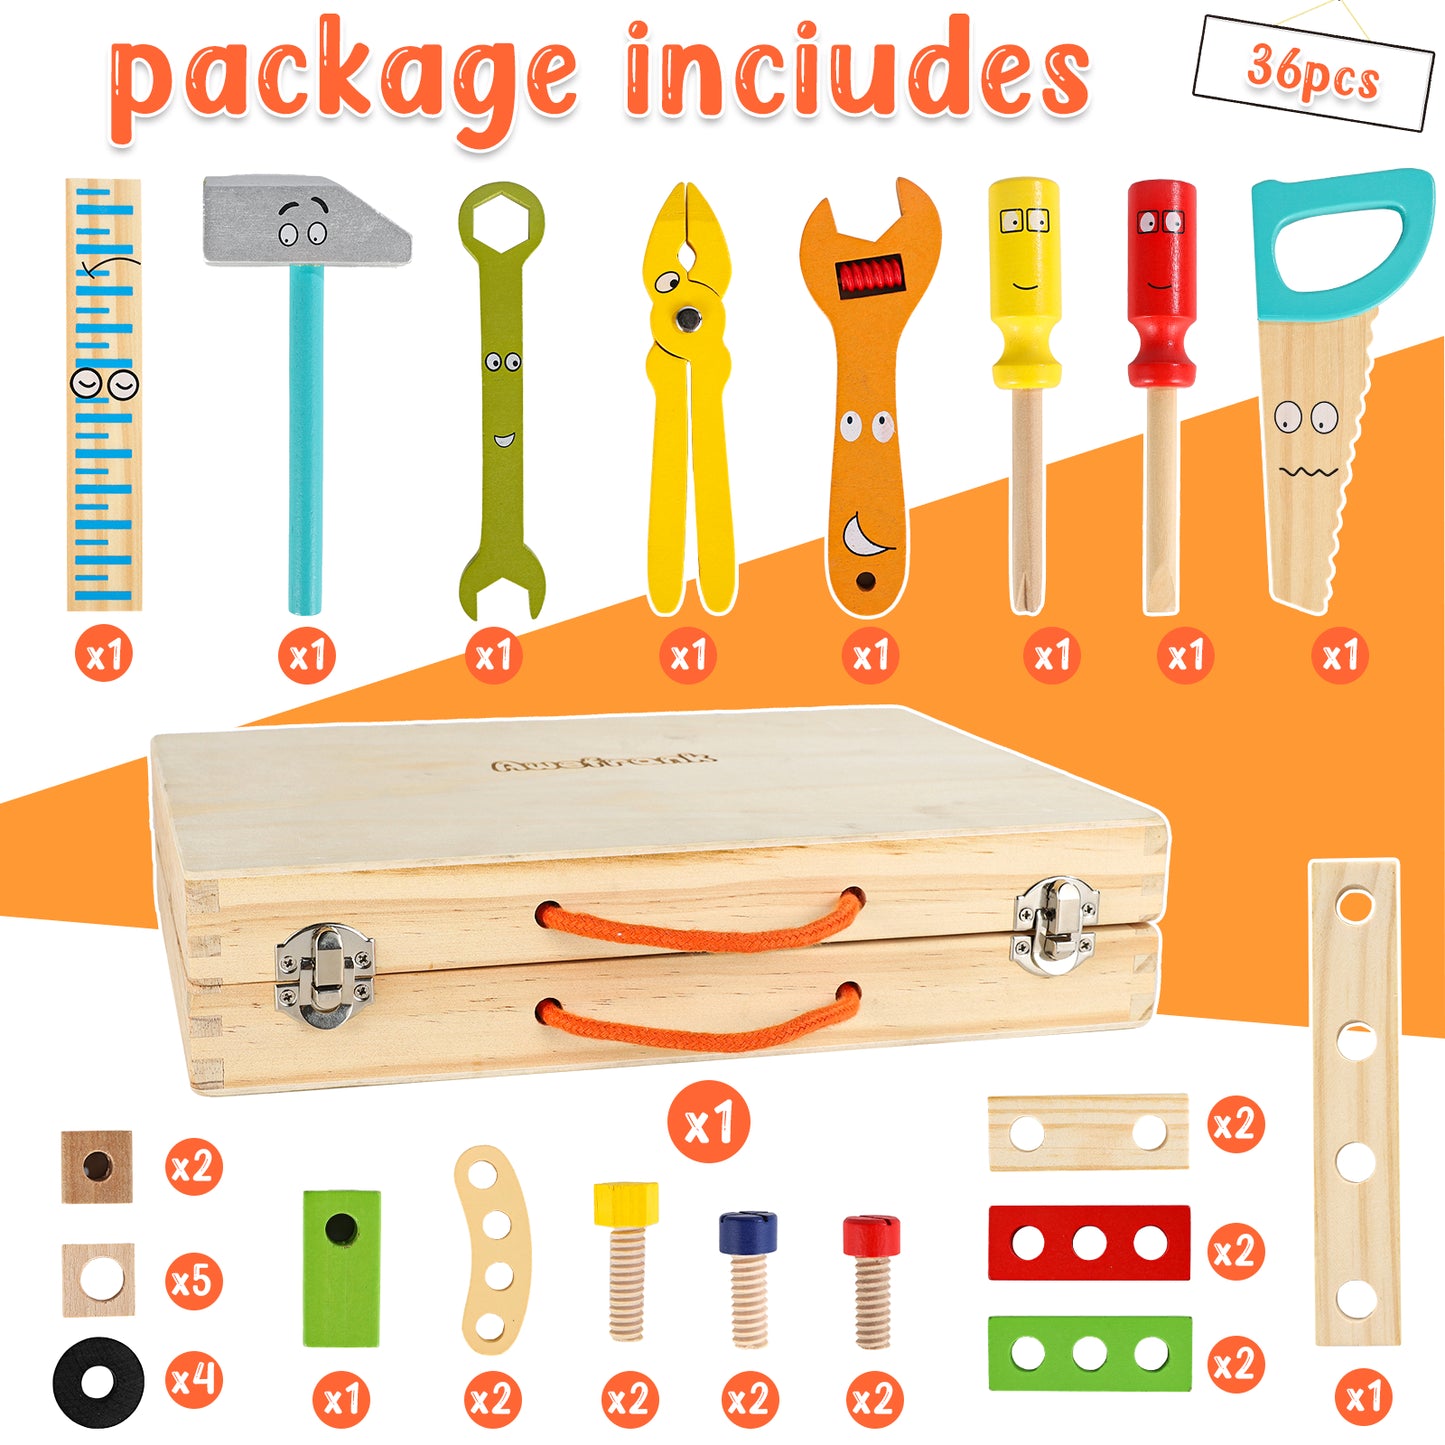 Awefrank Tool Kit for Kids, 37 pcs Wooden Toddler Tools Set Includes Tool Box & Stickers, Montessori Educational Stem Construction Toys